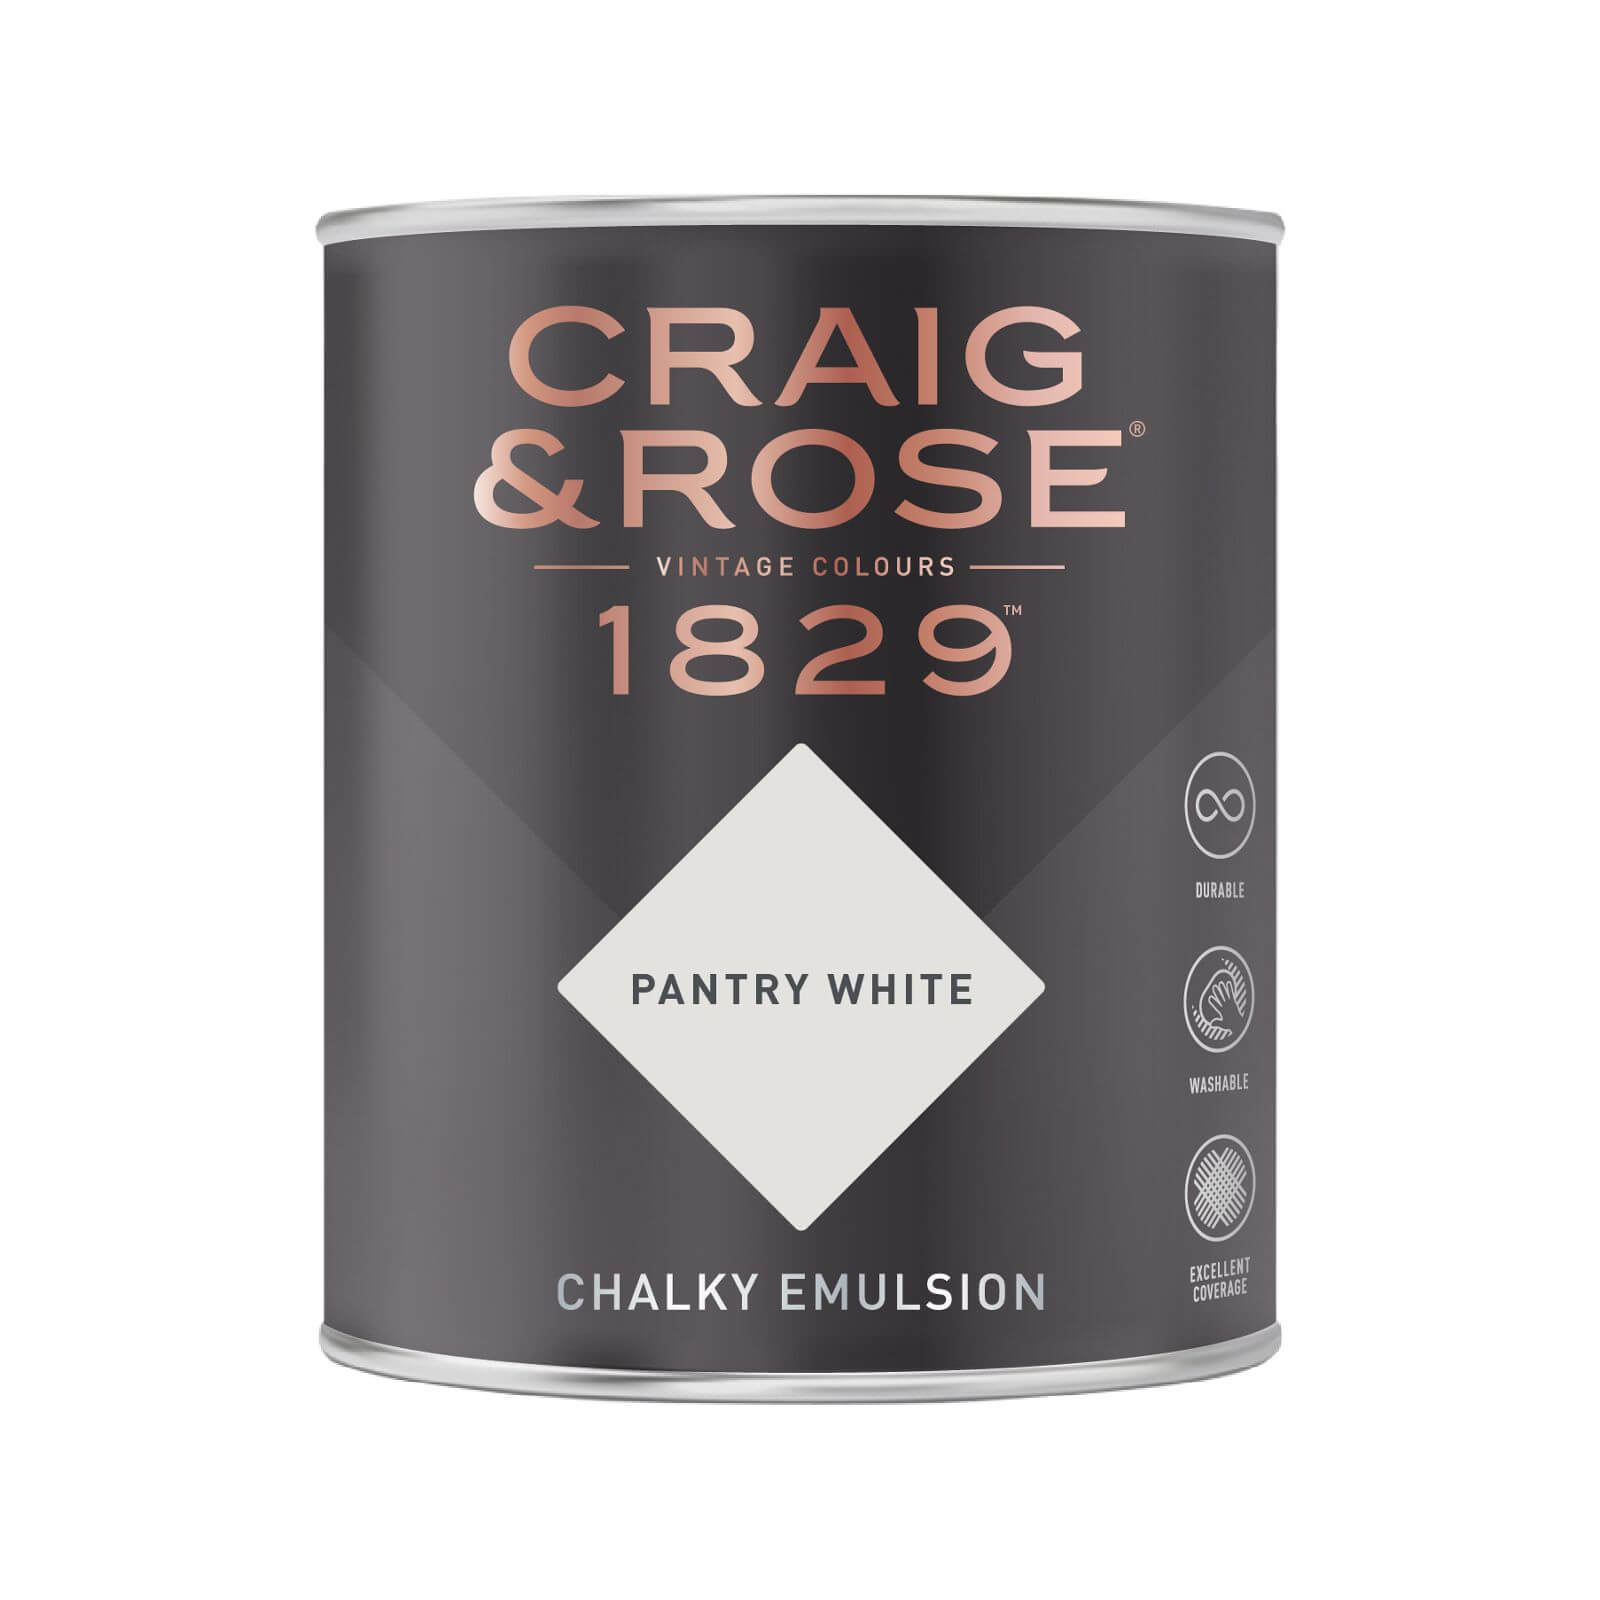 Craig & Rose 1829 Chalky Emulsion Paint Pantry White - 750ml